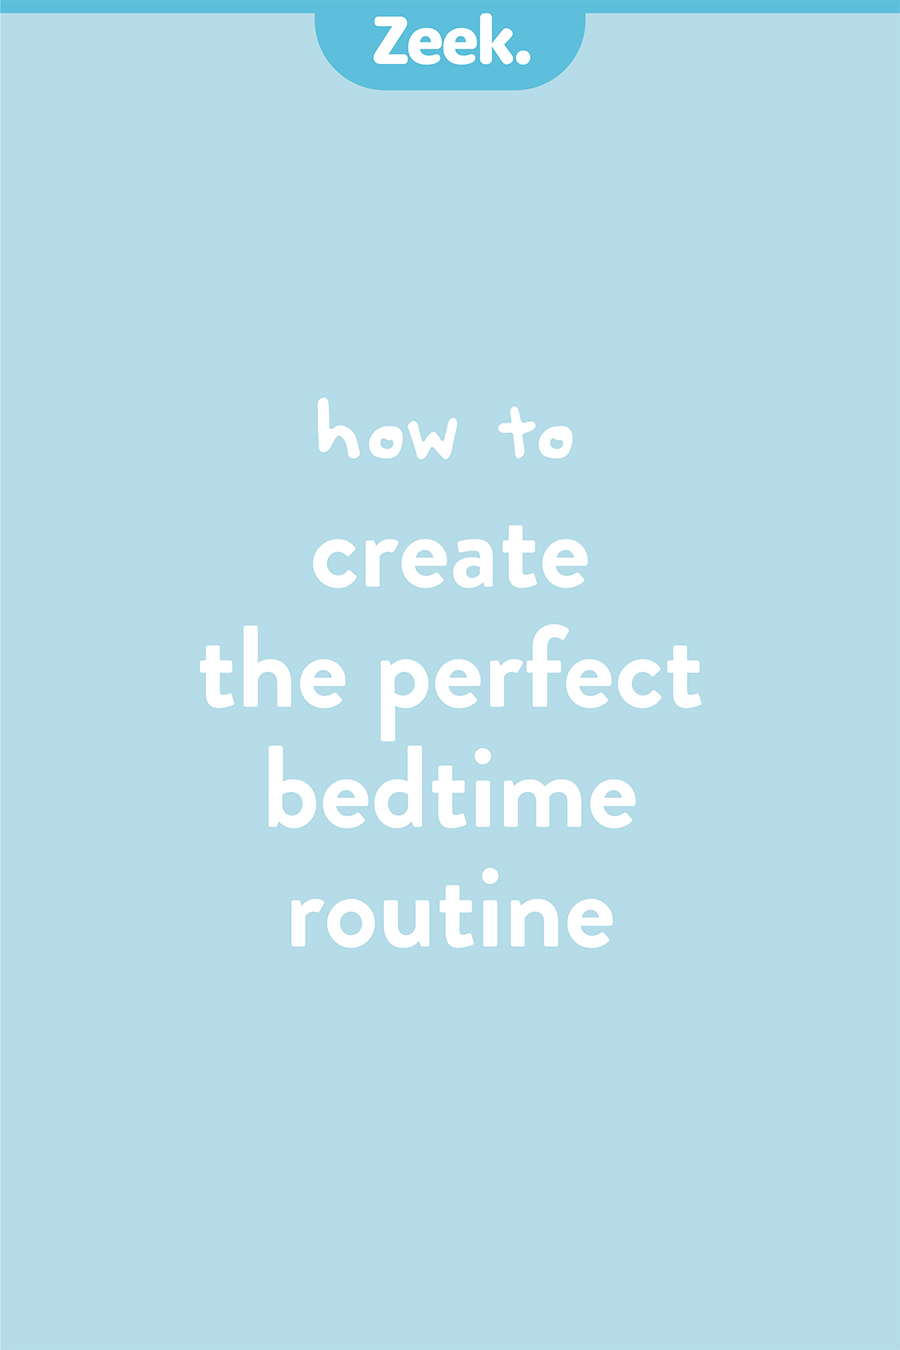 How to create the perfect bedtime routine